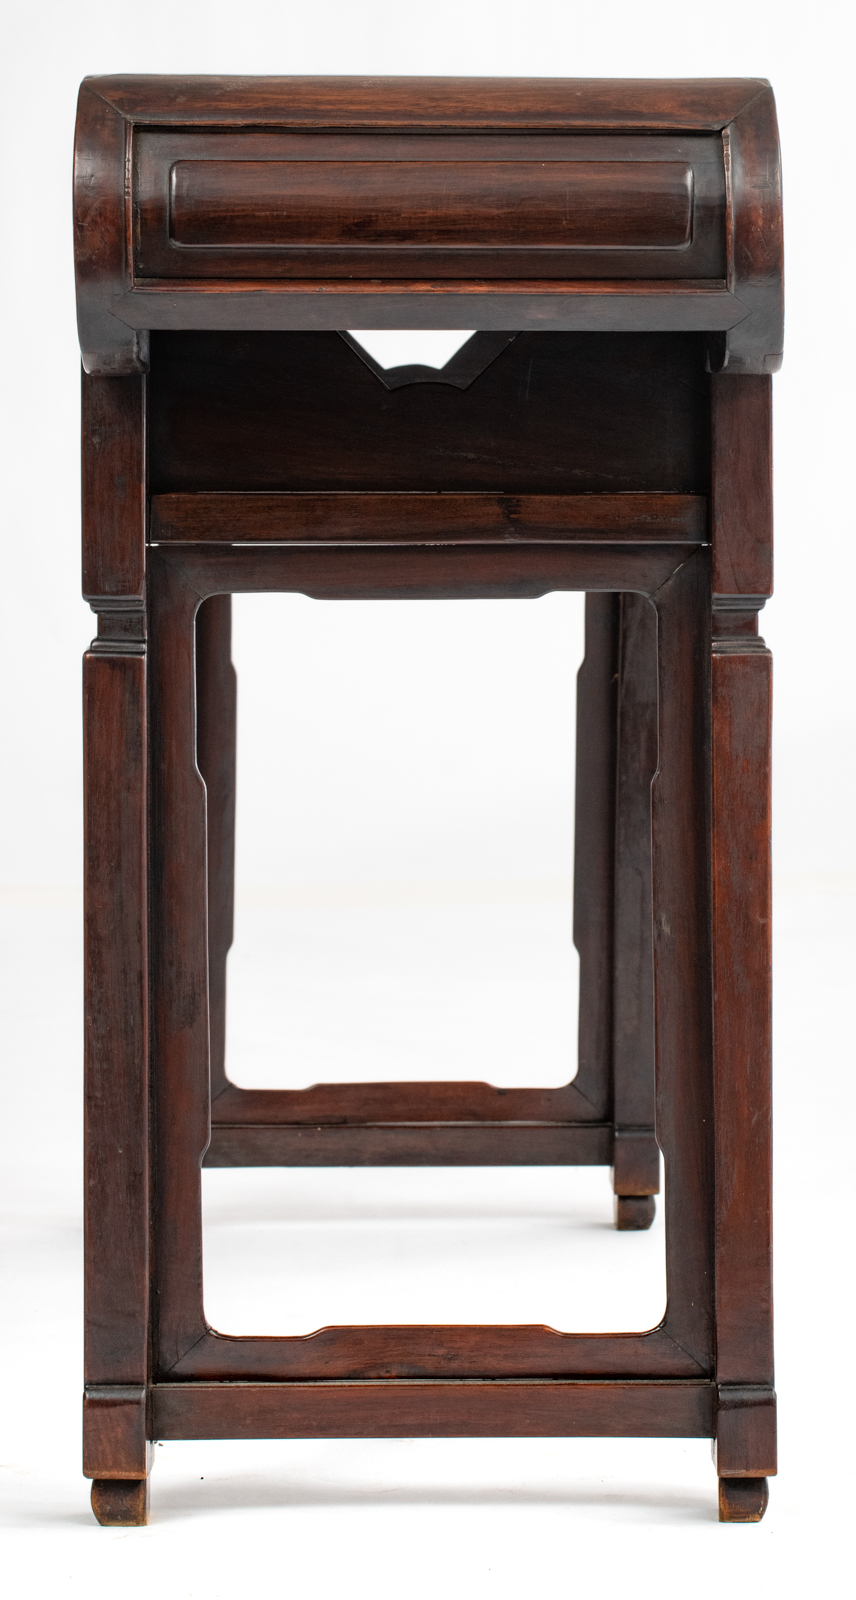 An imposing Chinese rosewood sideboard, with richly carved openwork decoration, H 93 - W 196 - D 45 - Image 3 of 7